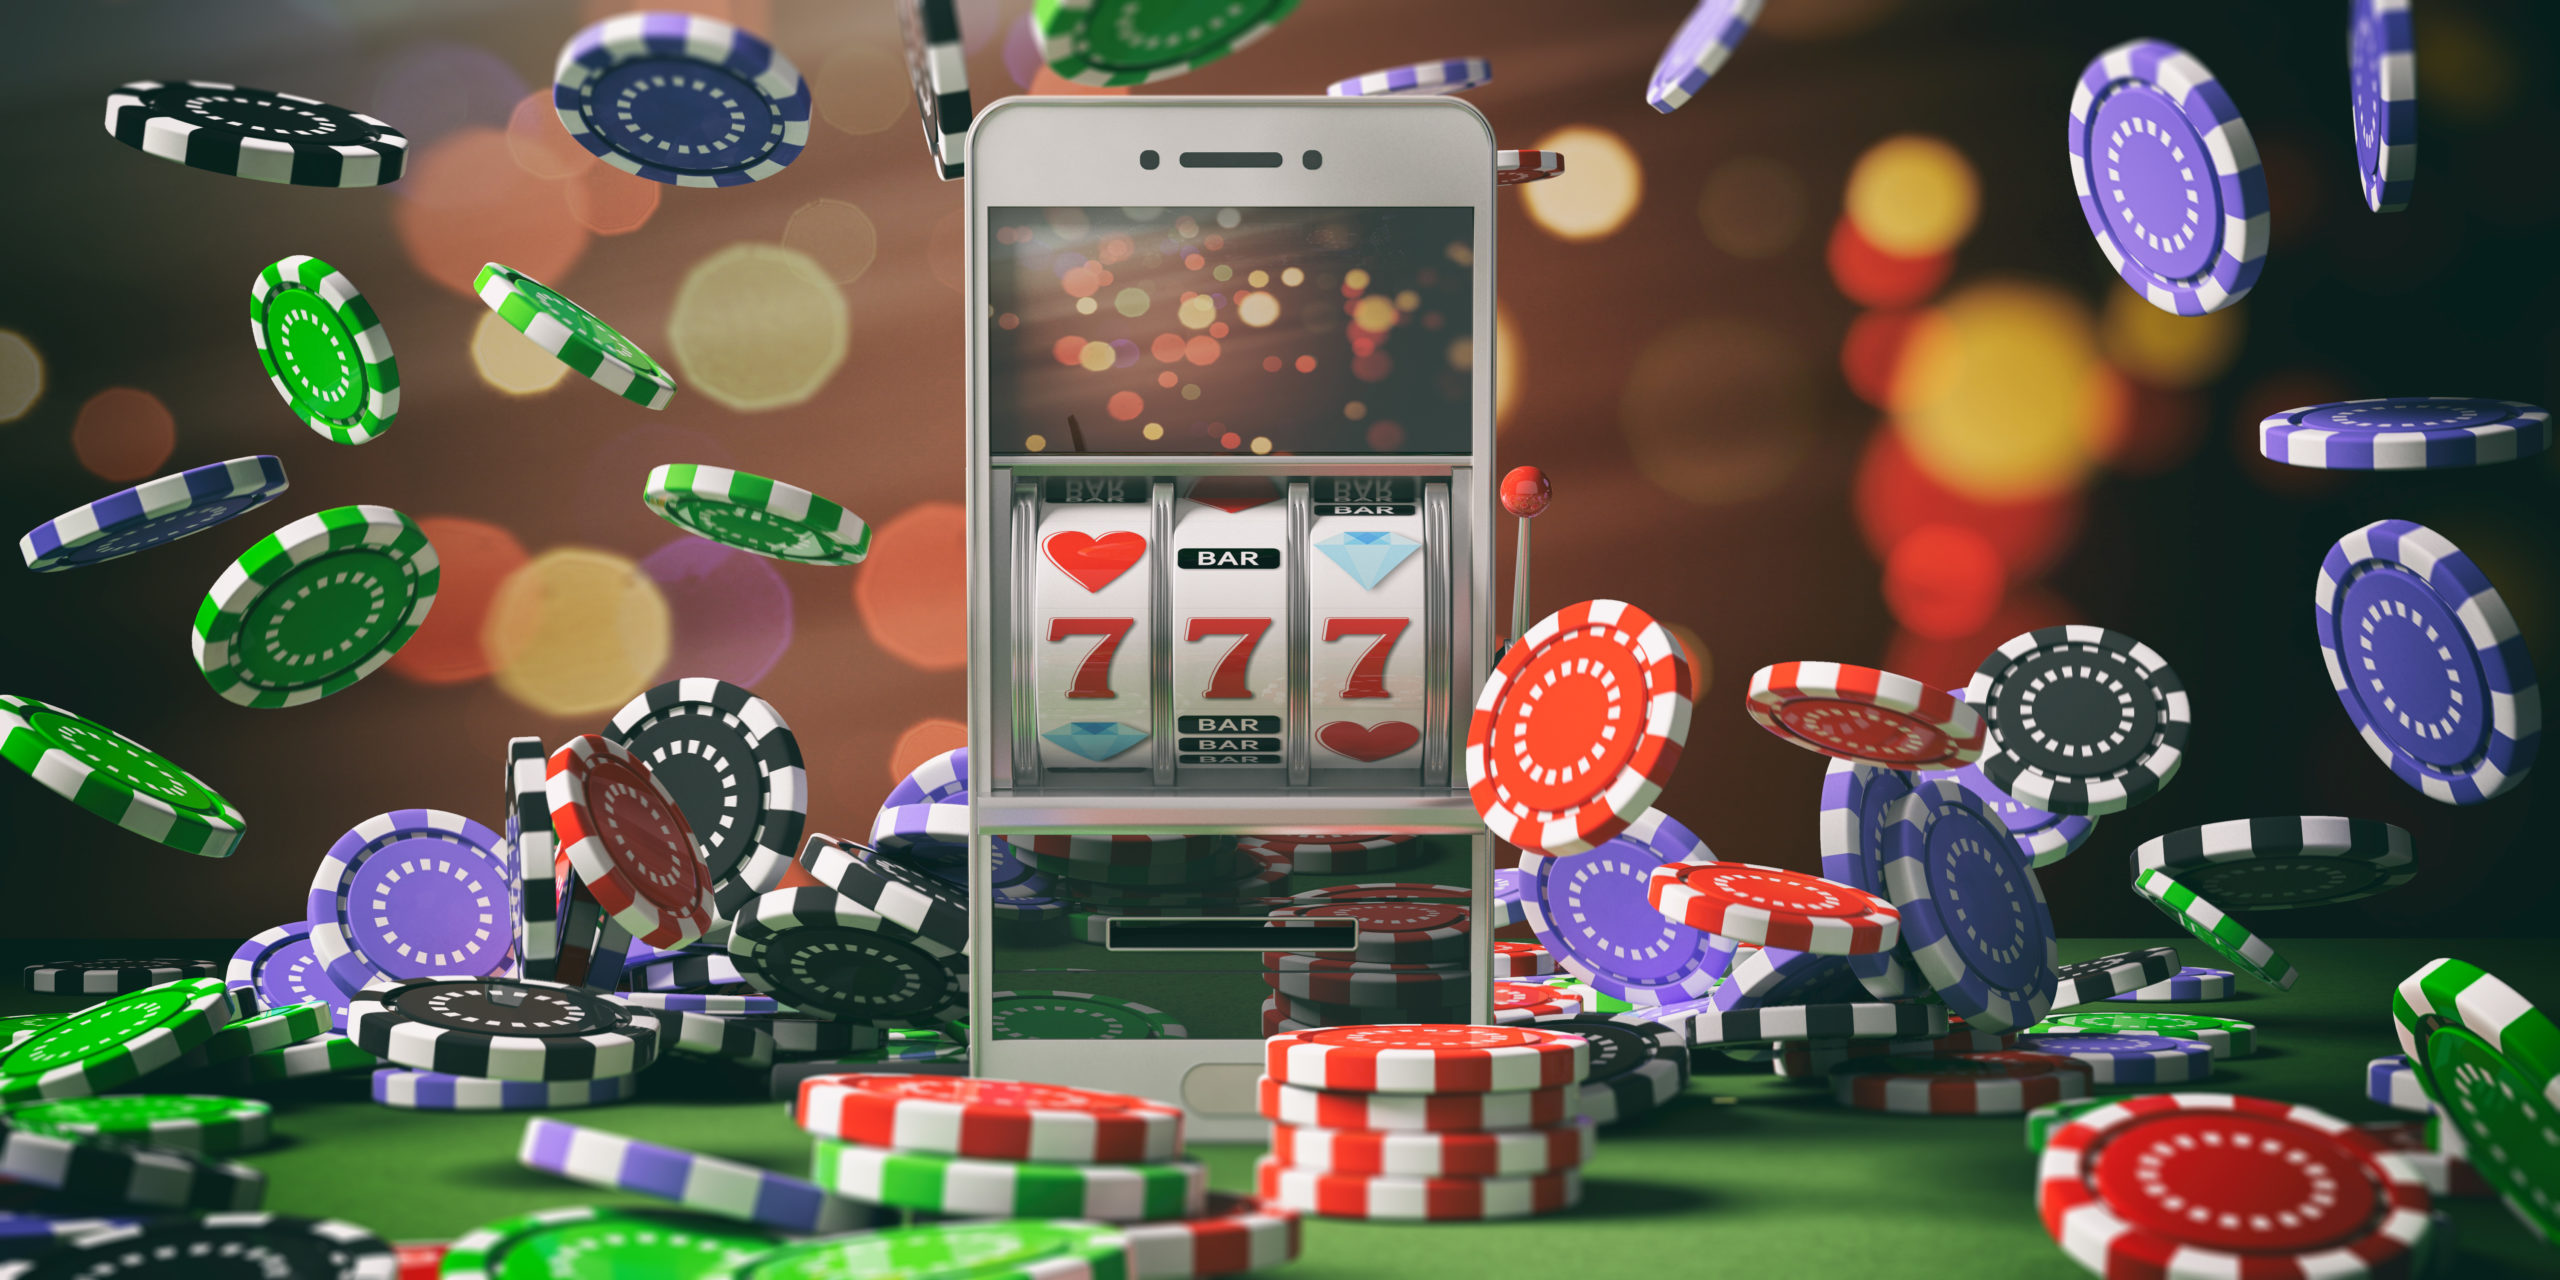 10 Things To Look For In An Online Slot Casino